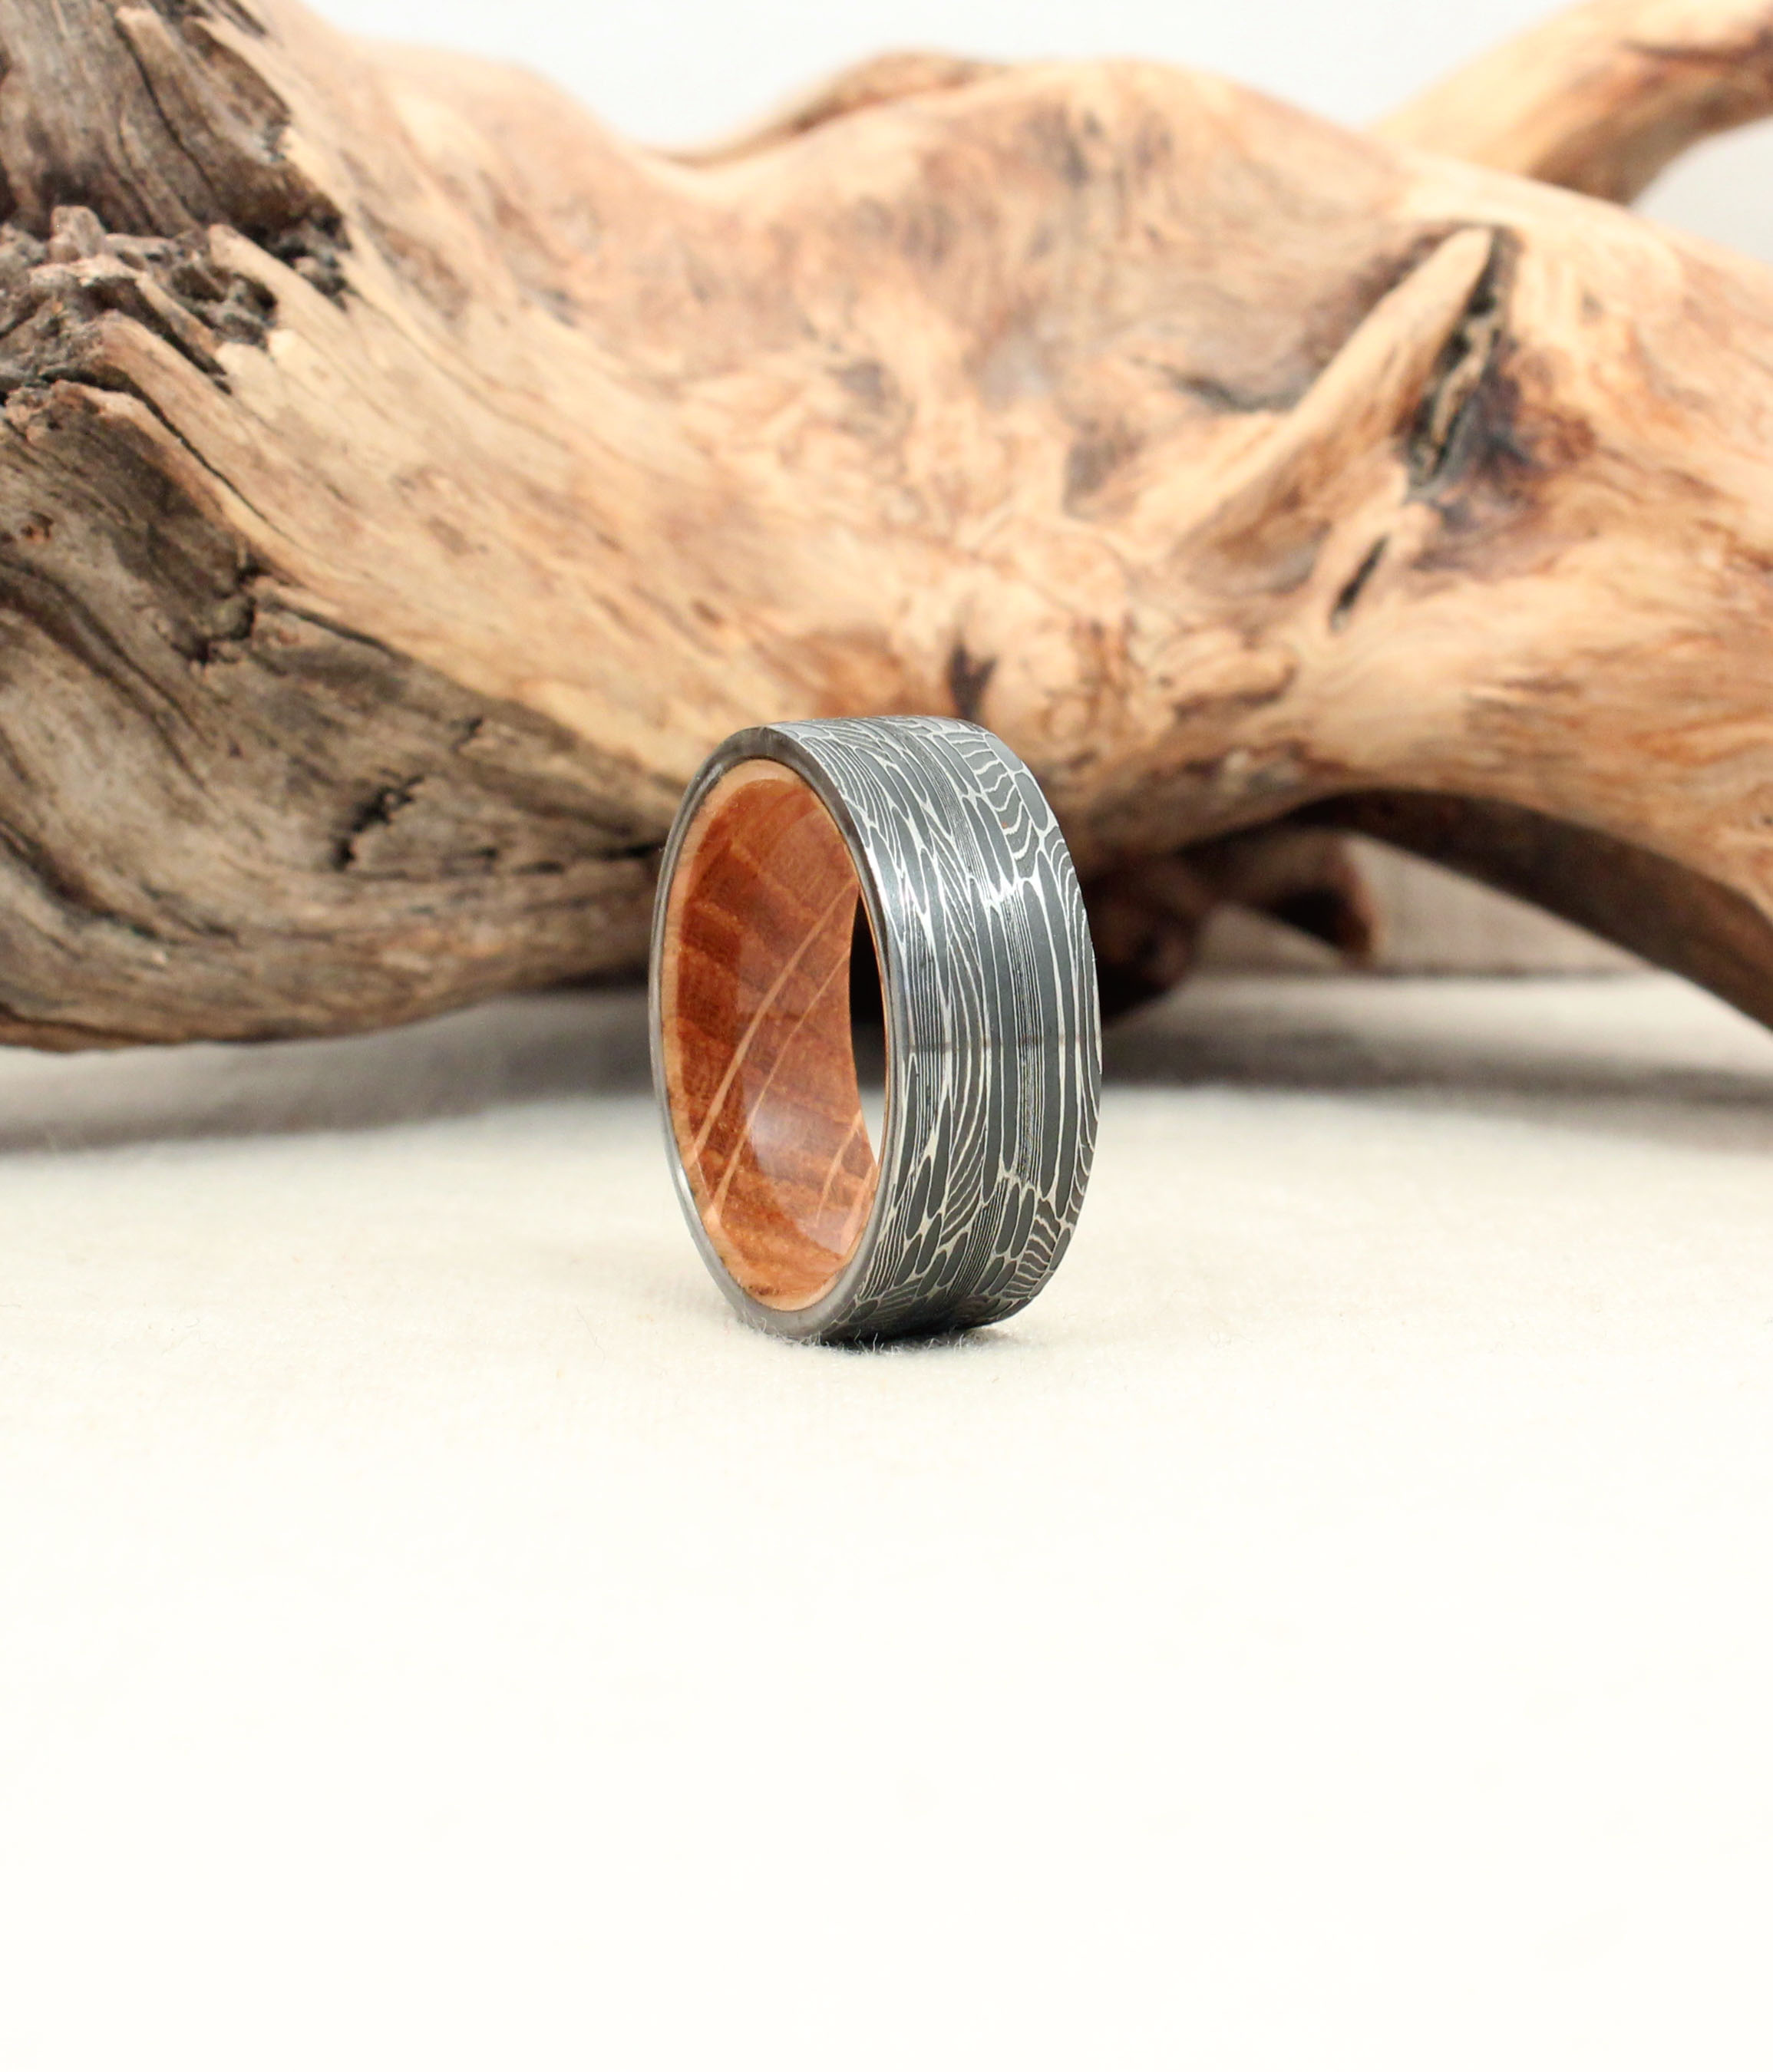 Damascus Steel and Wood Rings are HERE